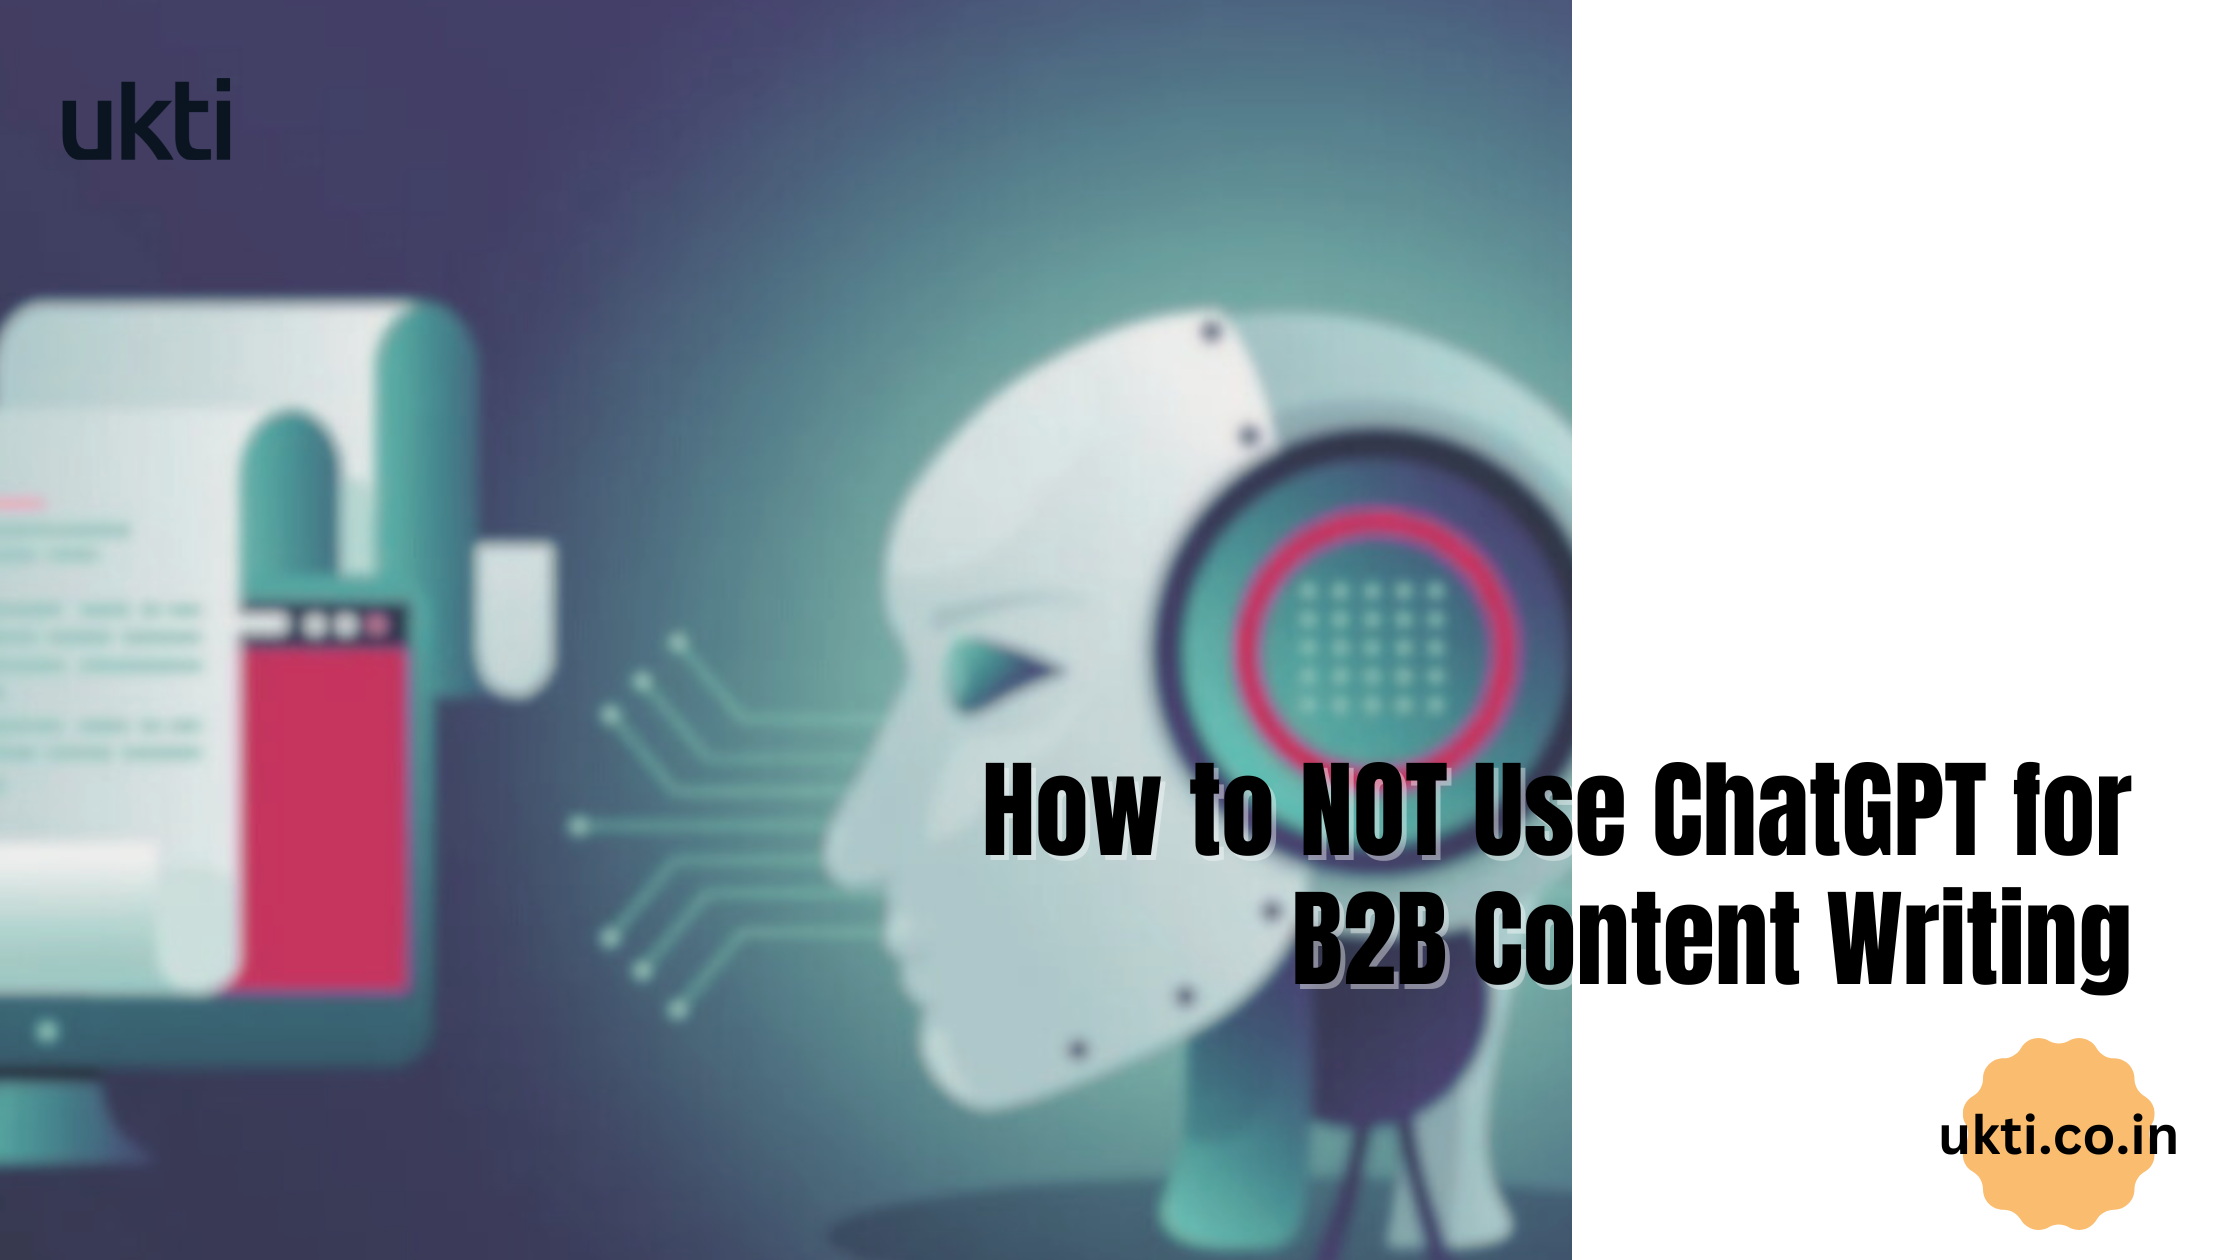 How to NOT Use ChatGPT for B2B Content Writing